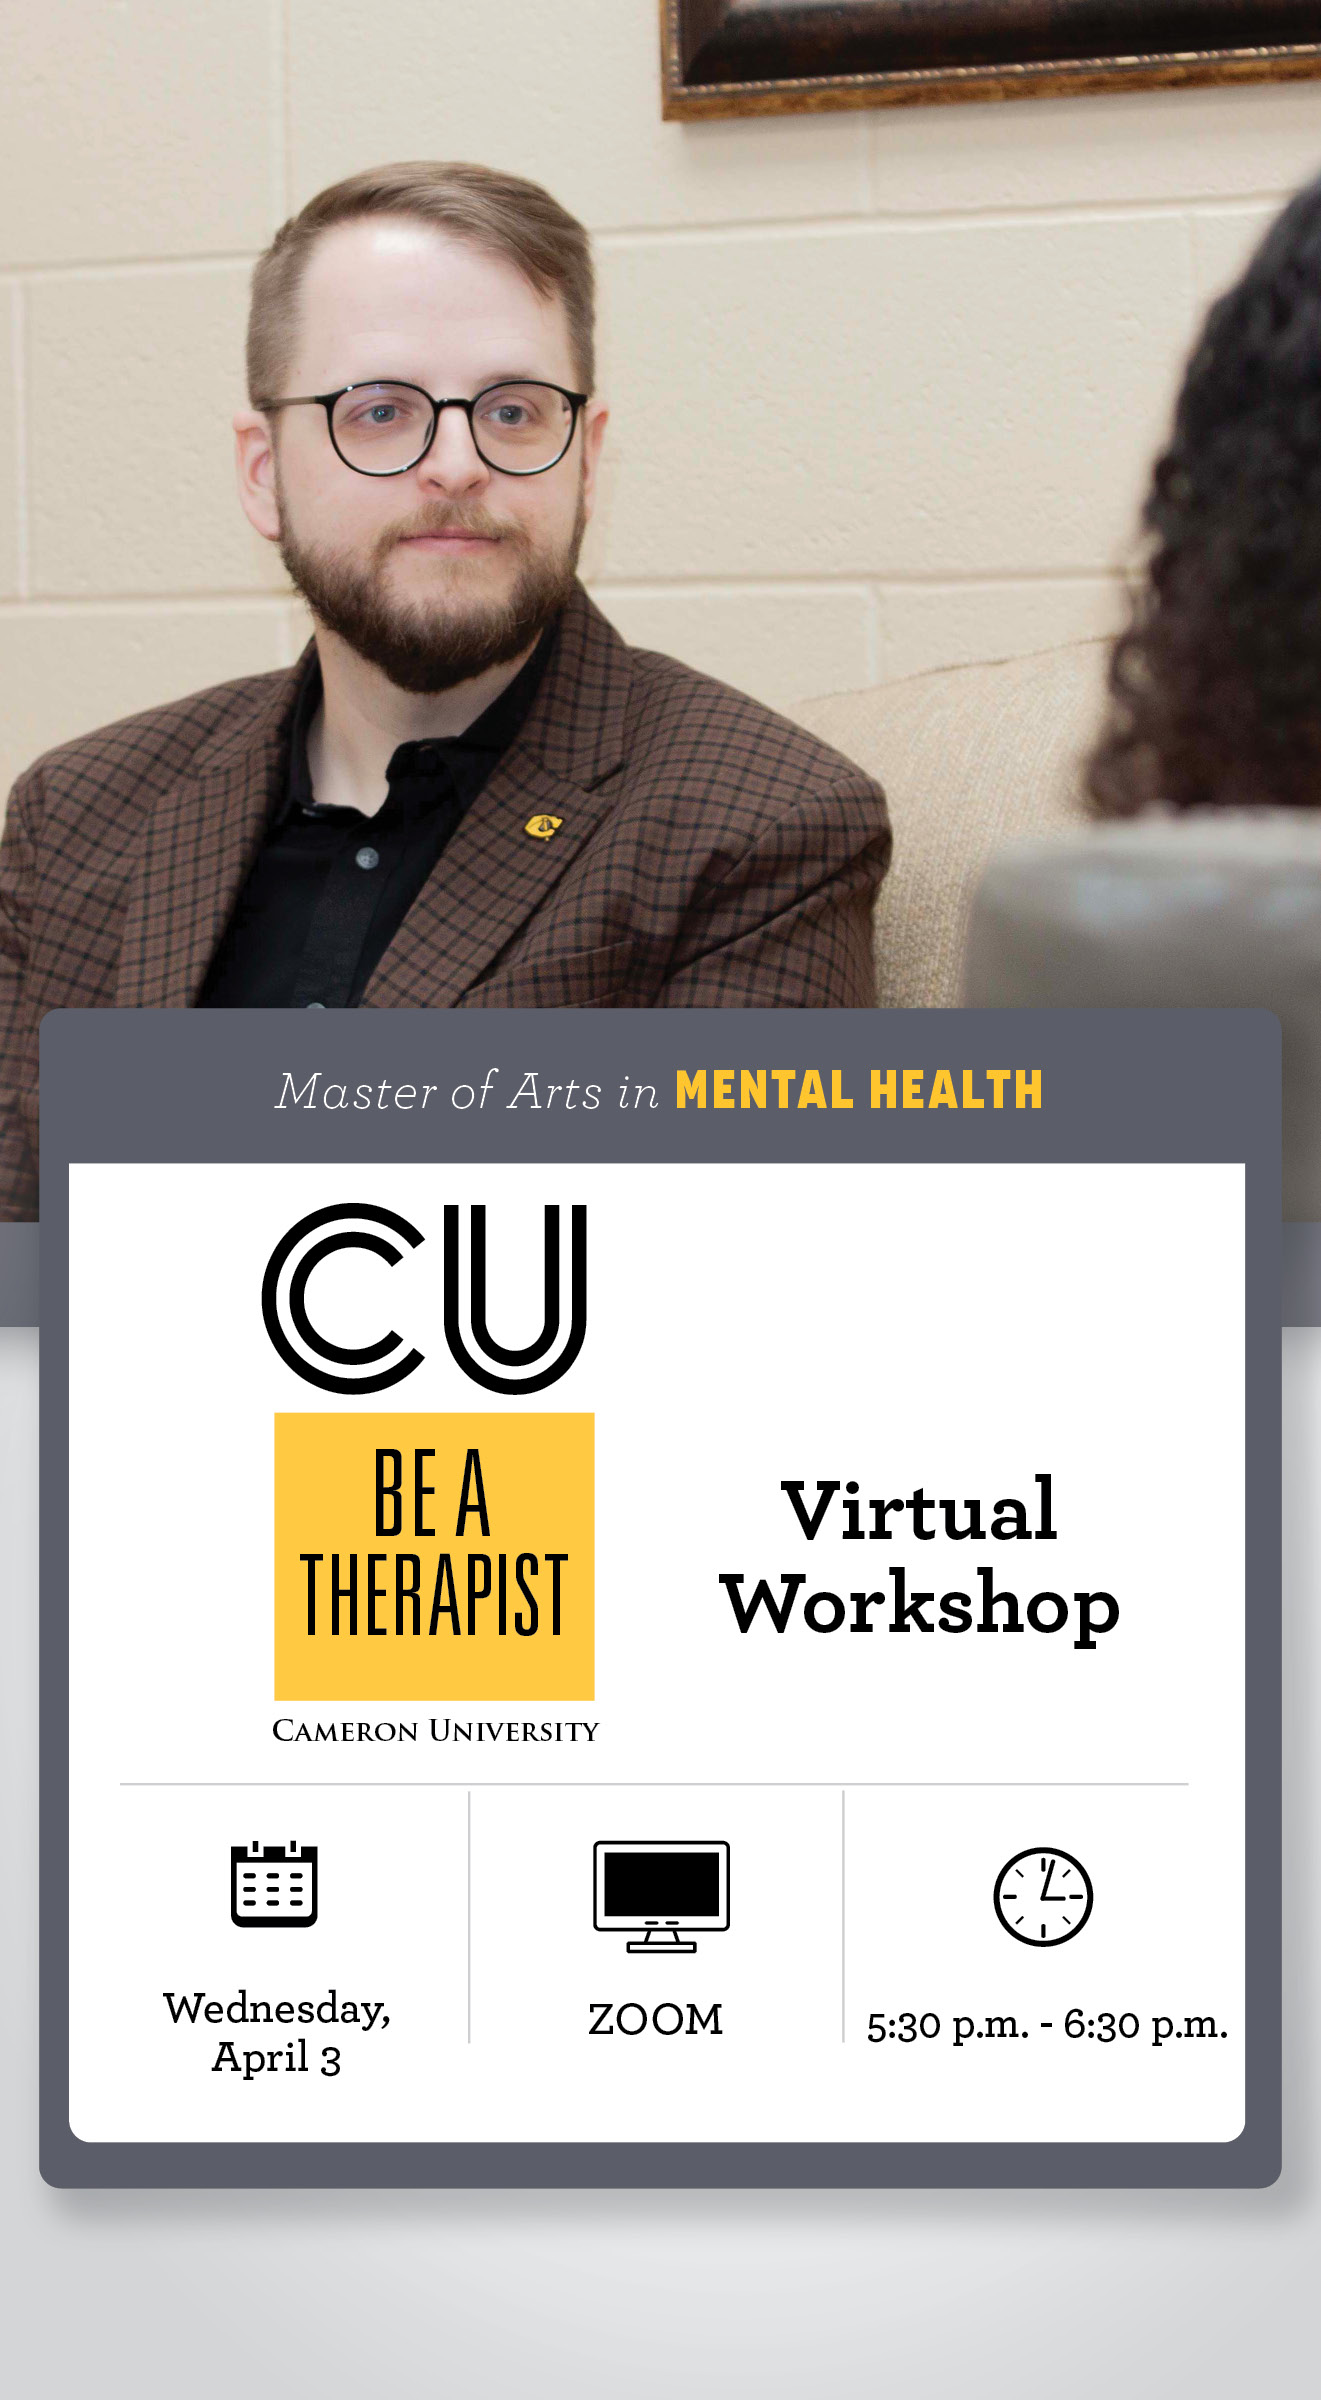 Master of Arts in Mental Health
CU Be A Therapist
Virtual Workshop
Wednesday, April 3
Zoom
5:30 - 6:30 p.m.